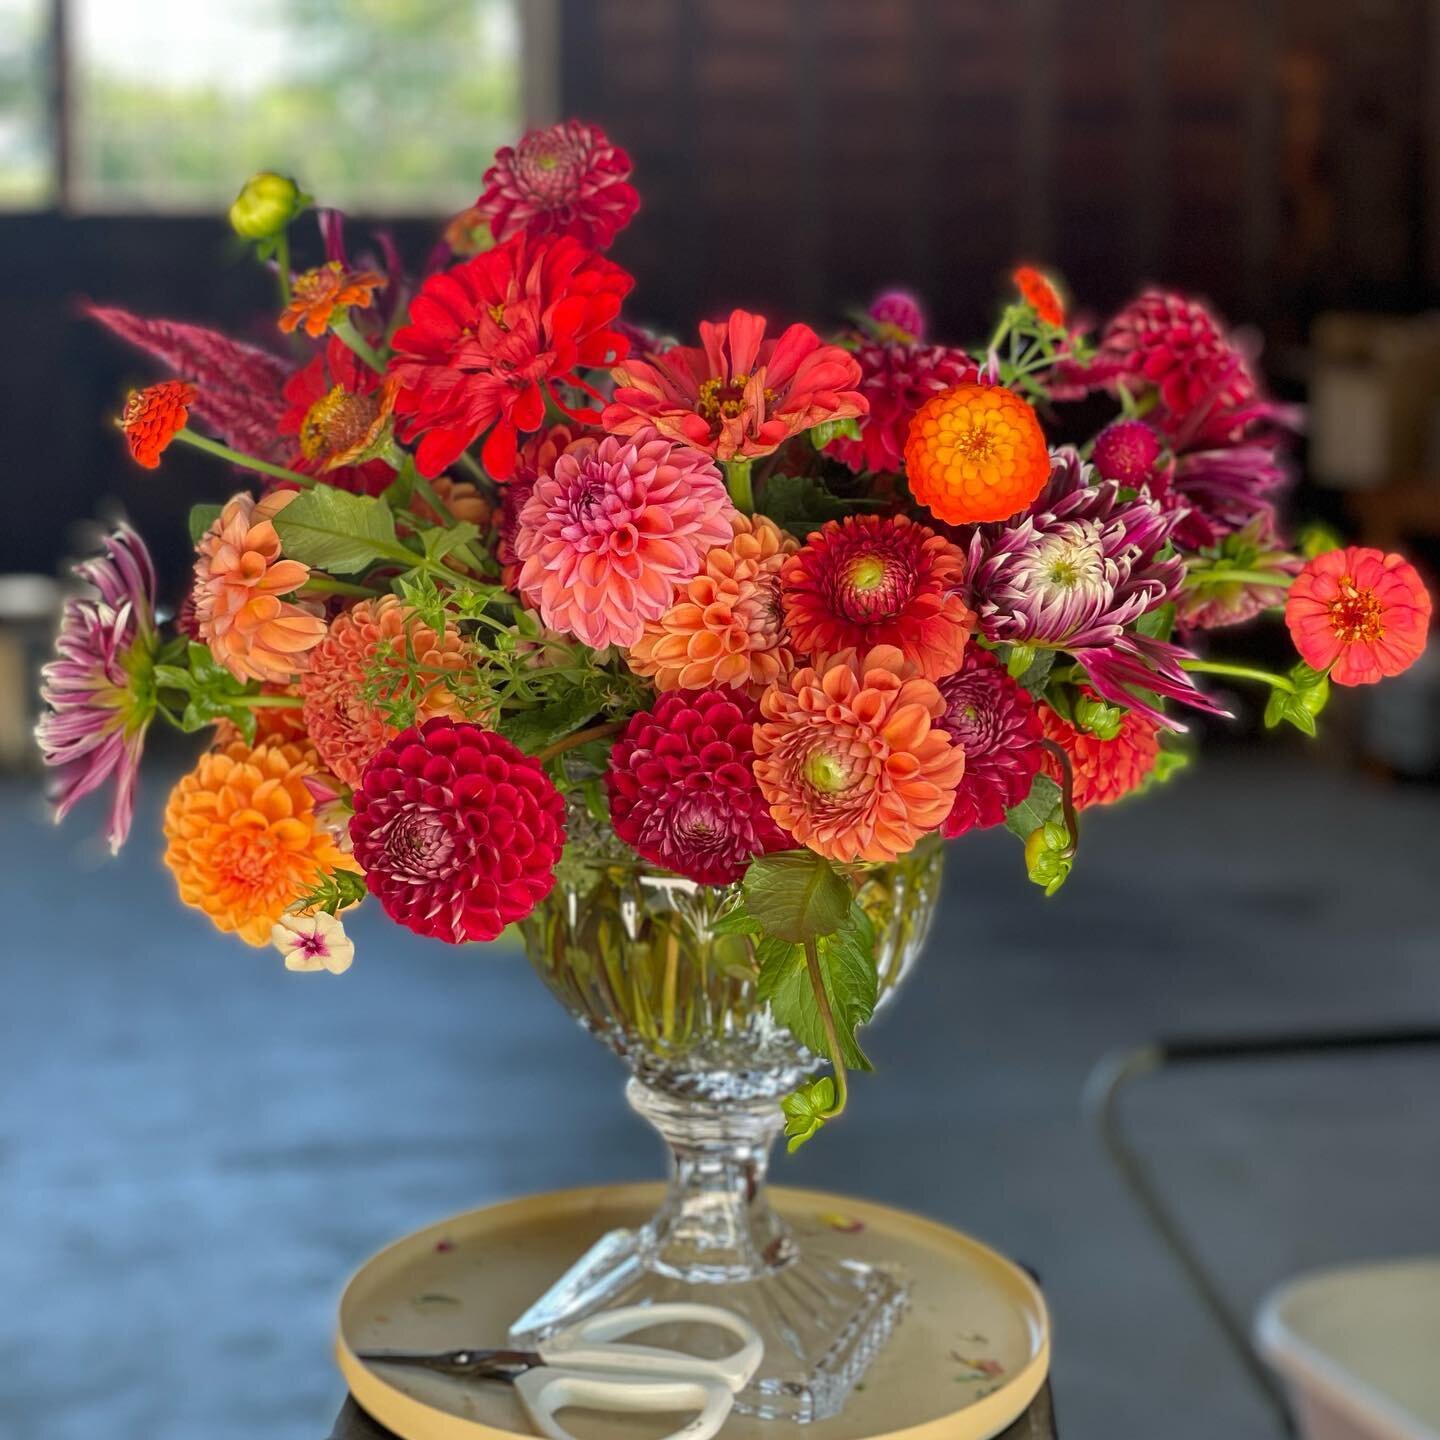 And just like that it&rsquo;s September.  The gardens are quickly changing their colors and giving over to fall colors. So enjoy making something pretty with all of the leftovers from this weekend&rsquo;s harvest. #scituateharbor  #dahlias #flowerfar